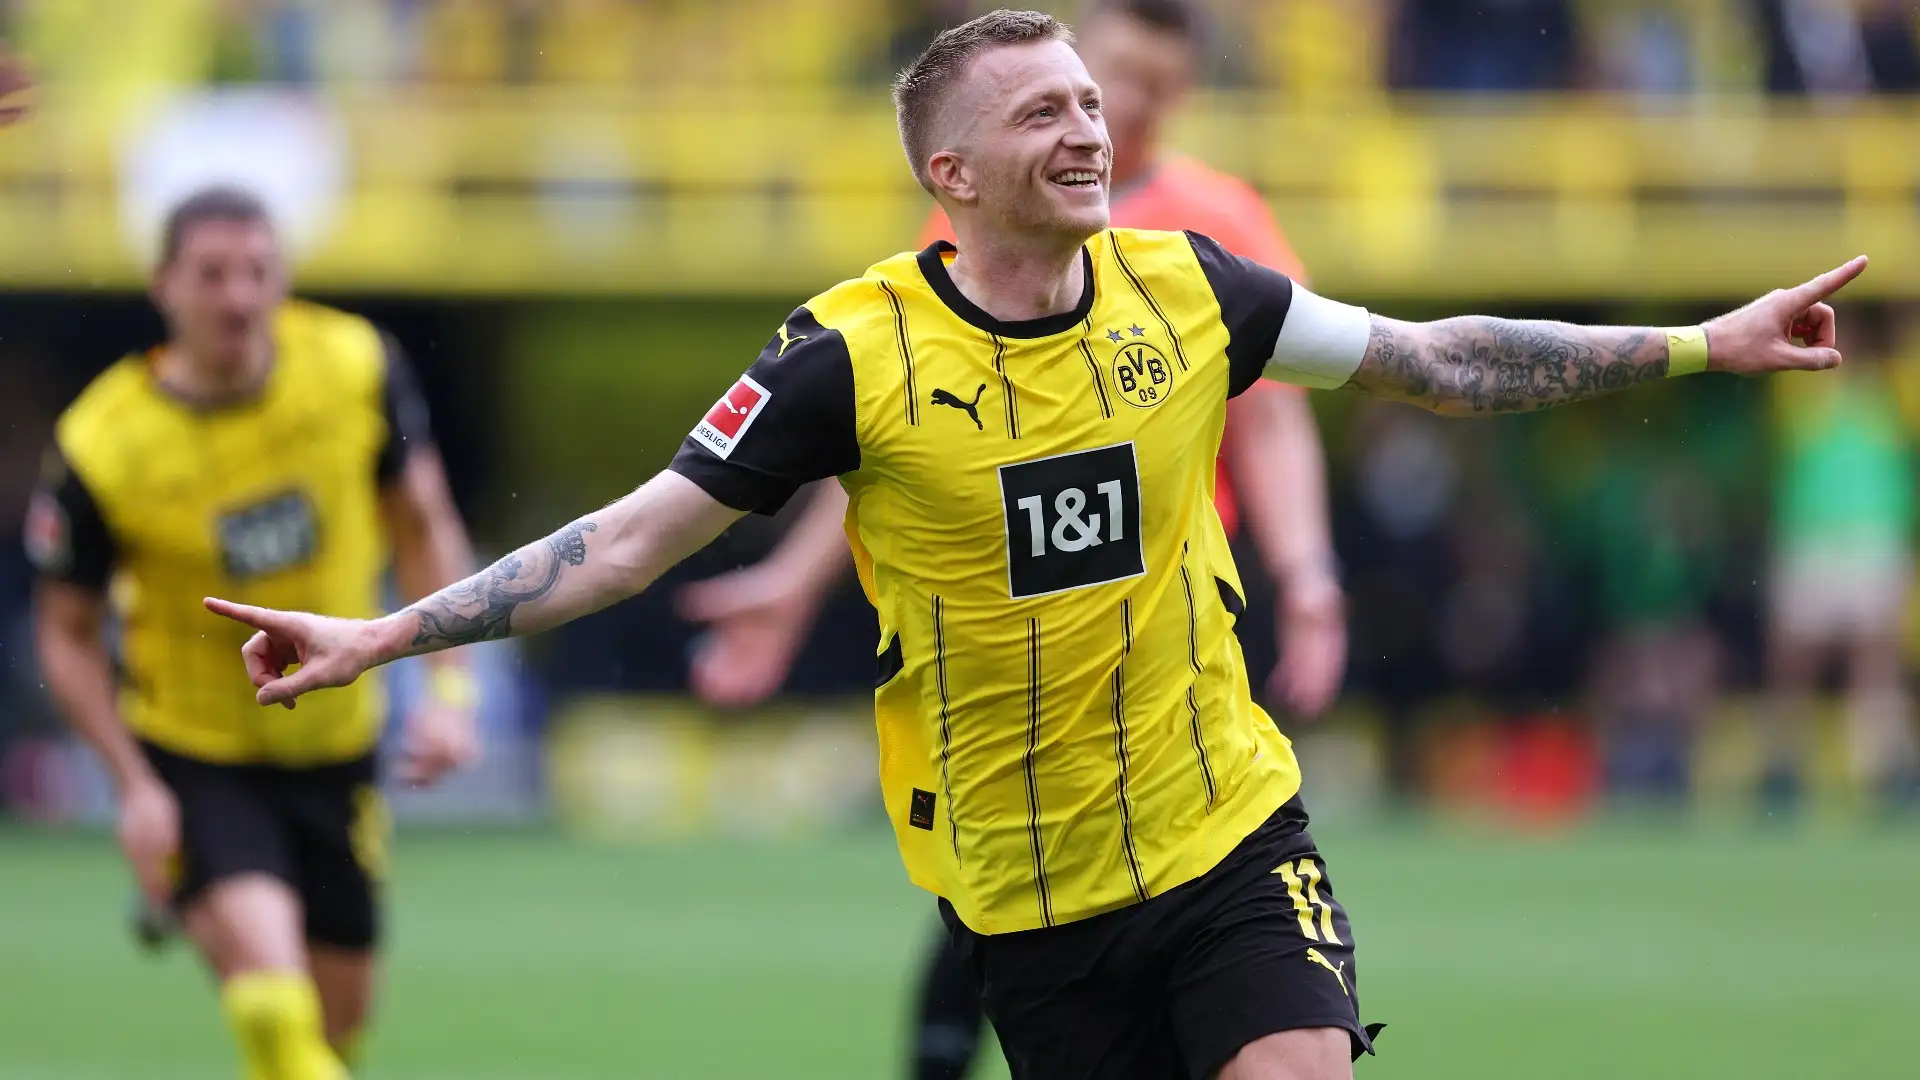 'Nothing better' - Marco Reus relishing playing the last game of his Borussia Dortmund career against Real Madrid in the Champions League final